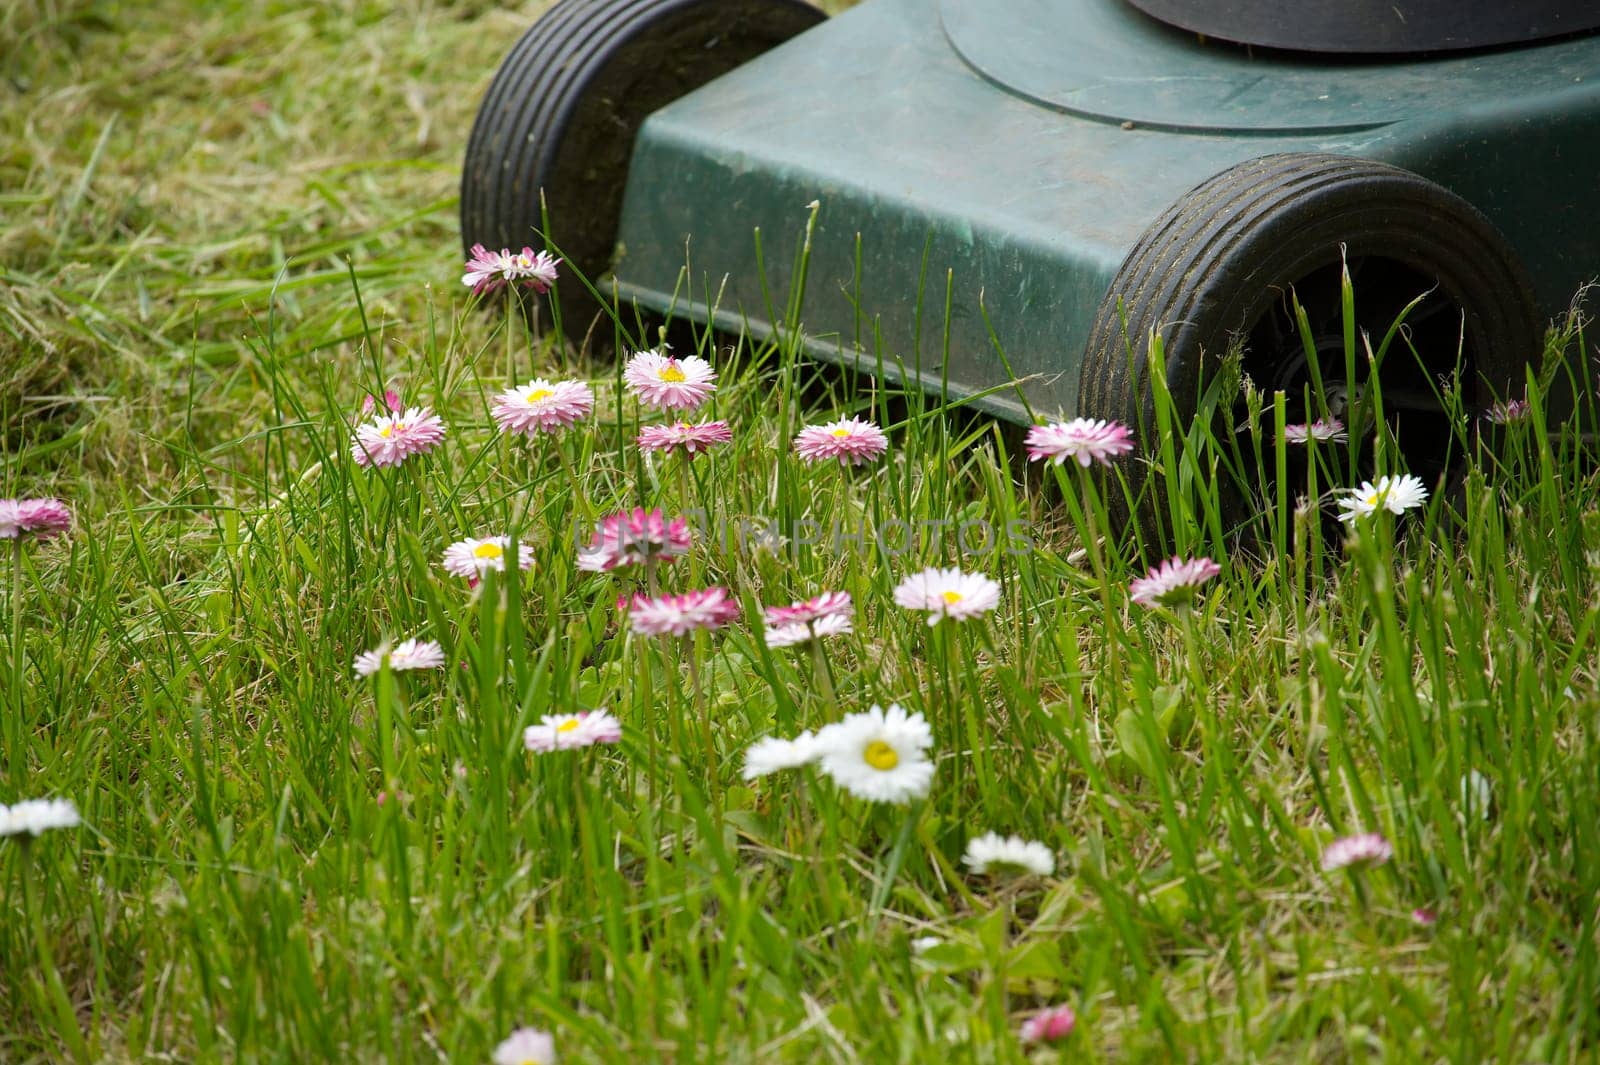 Seasons and yard maintenance concept with lawn mower and dainty white and pink spring flowers in a green garden lawn